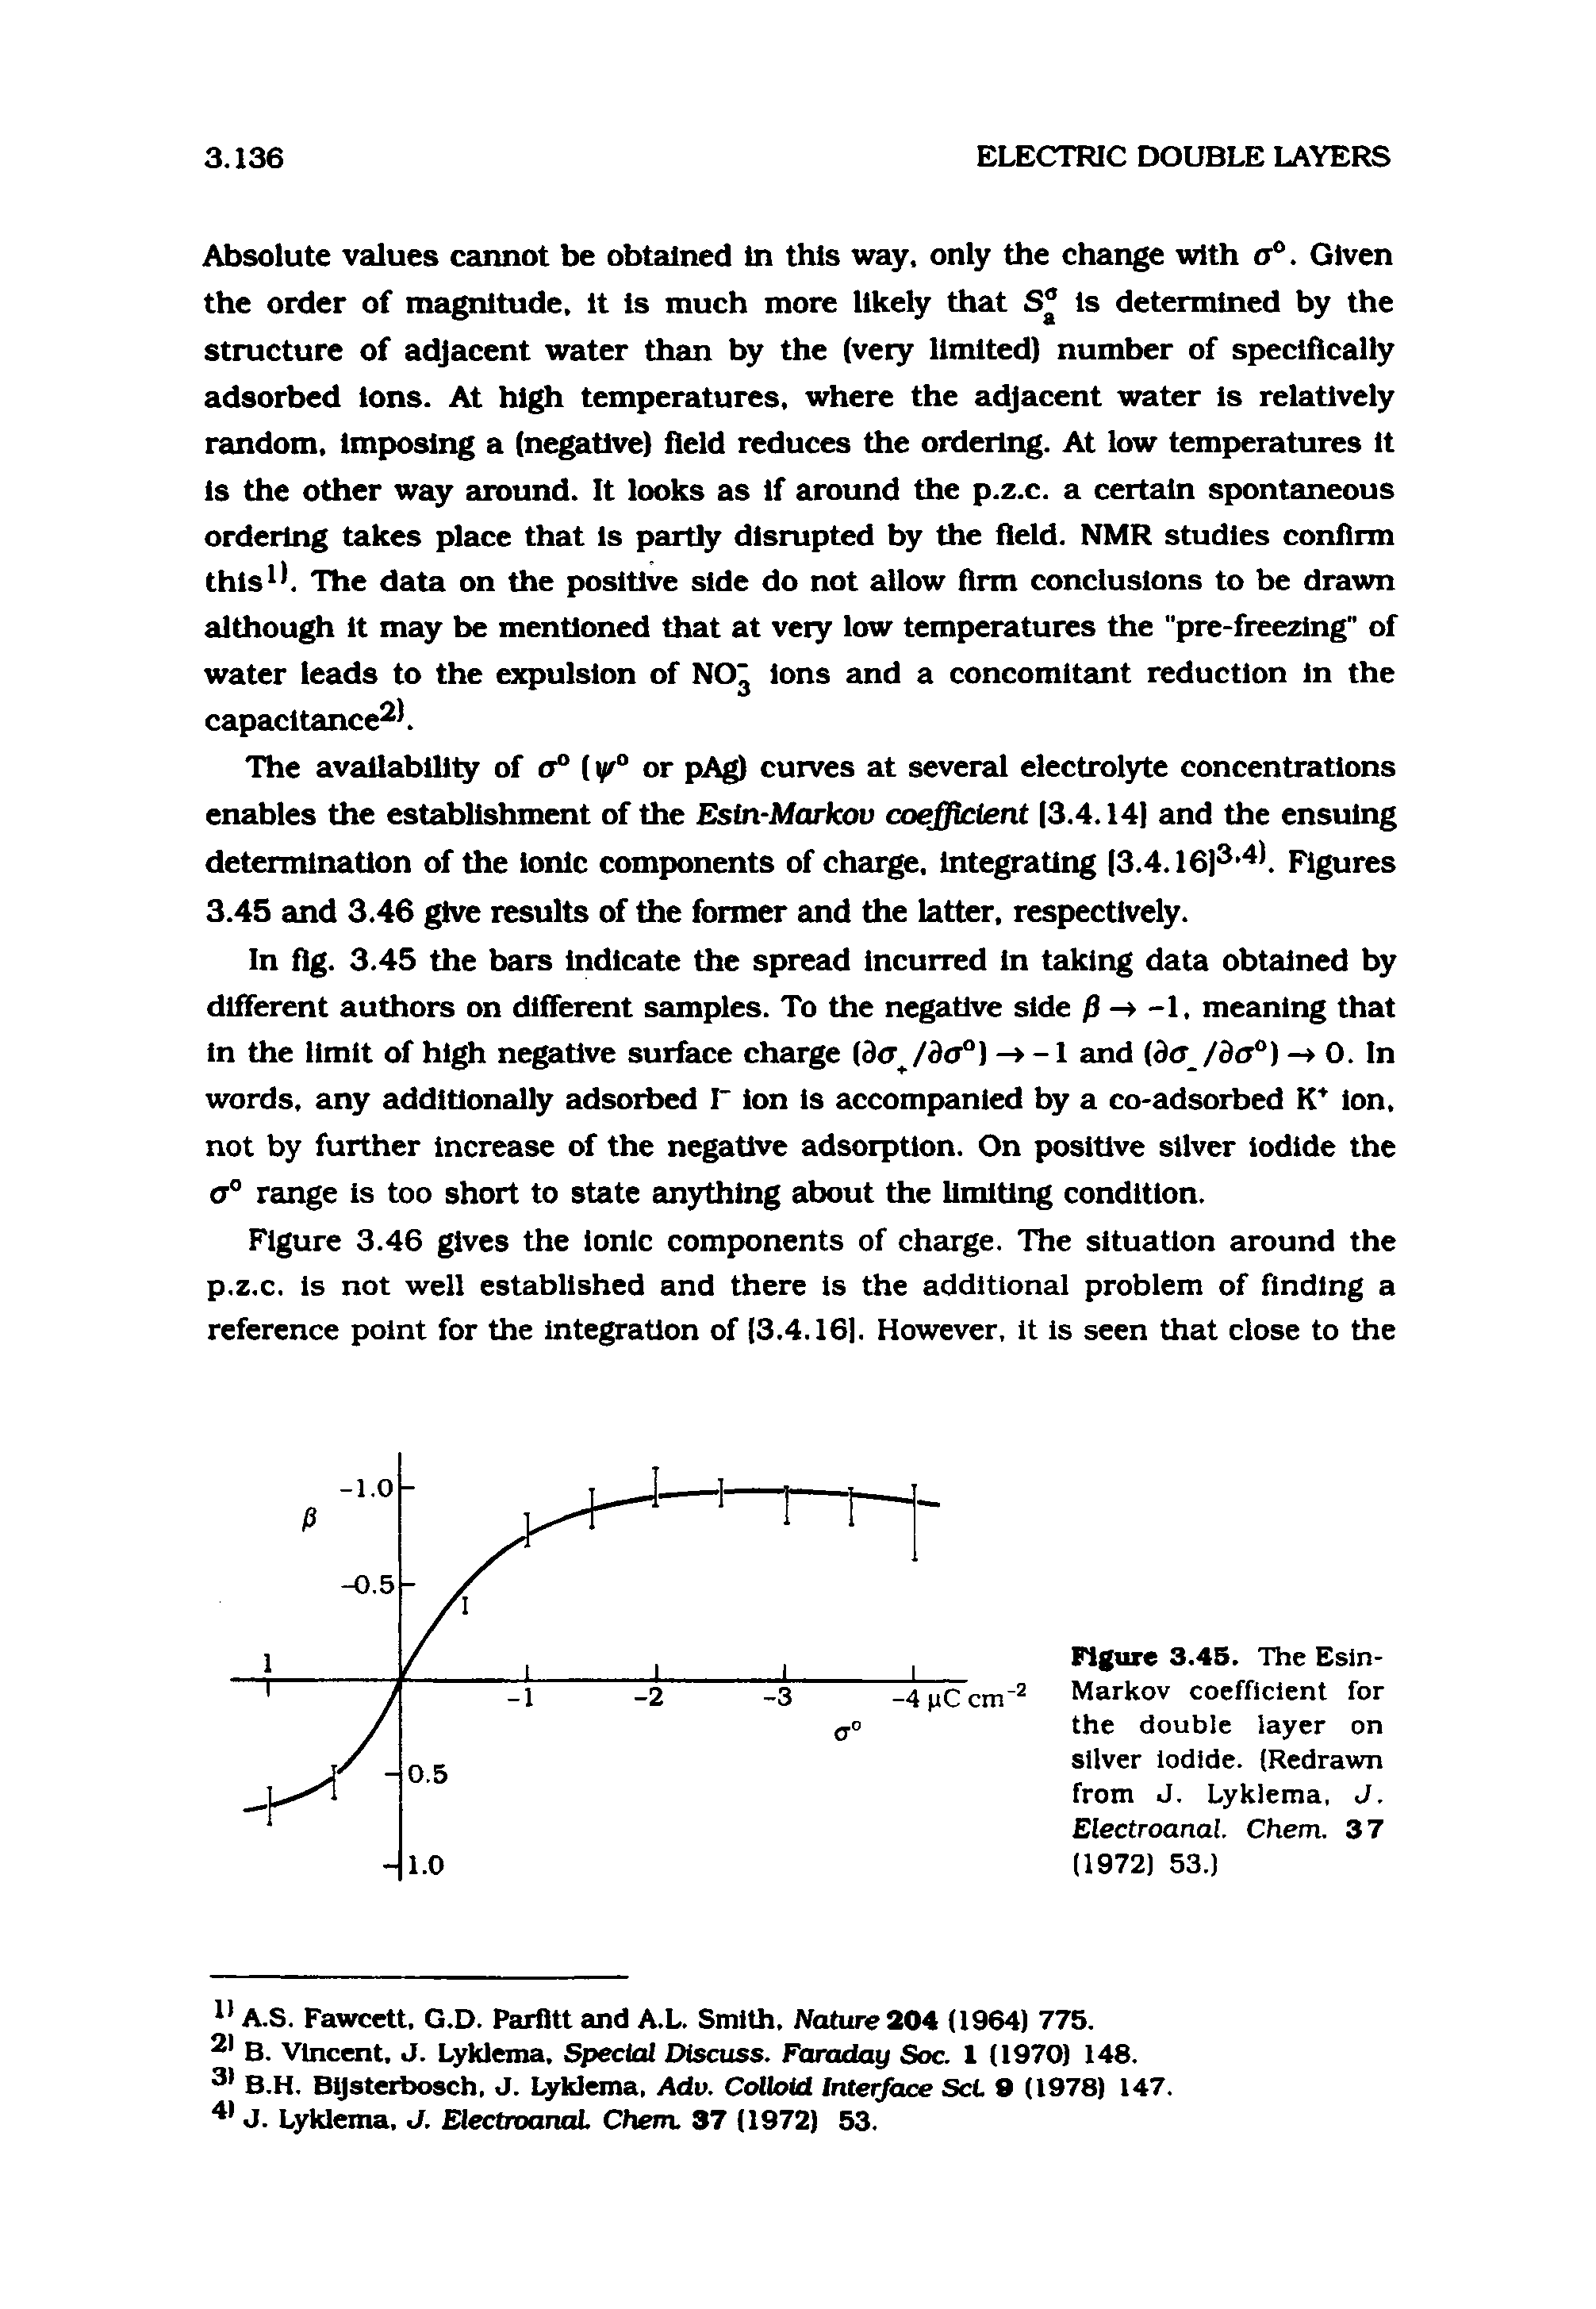 Figure 3.45. The Esin-Markov coefficient for the double layer on silver iodide. (Redrawn from J. Lyklema. J. Electroanal. Chem. 37 (1972) 53.)...